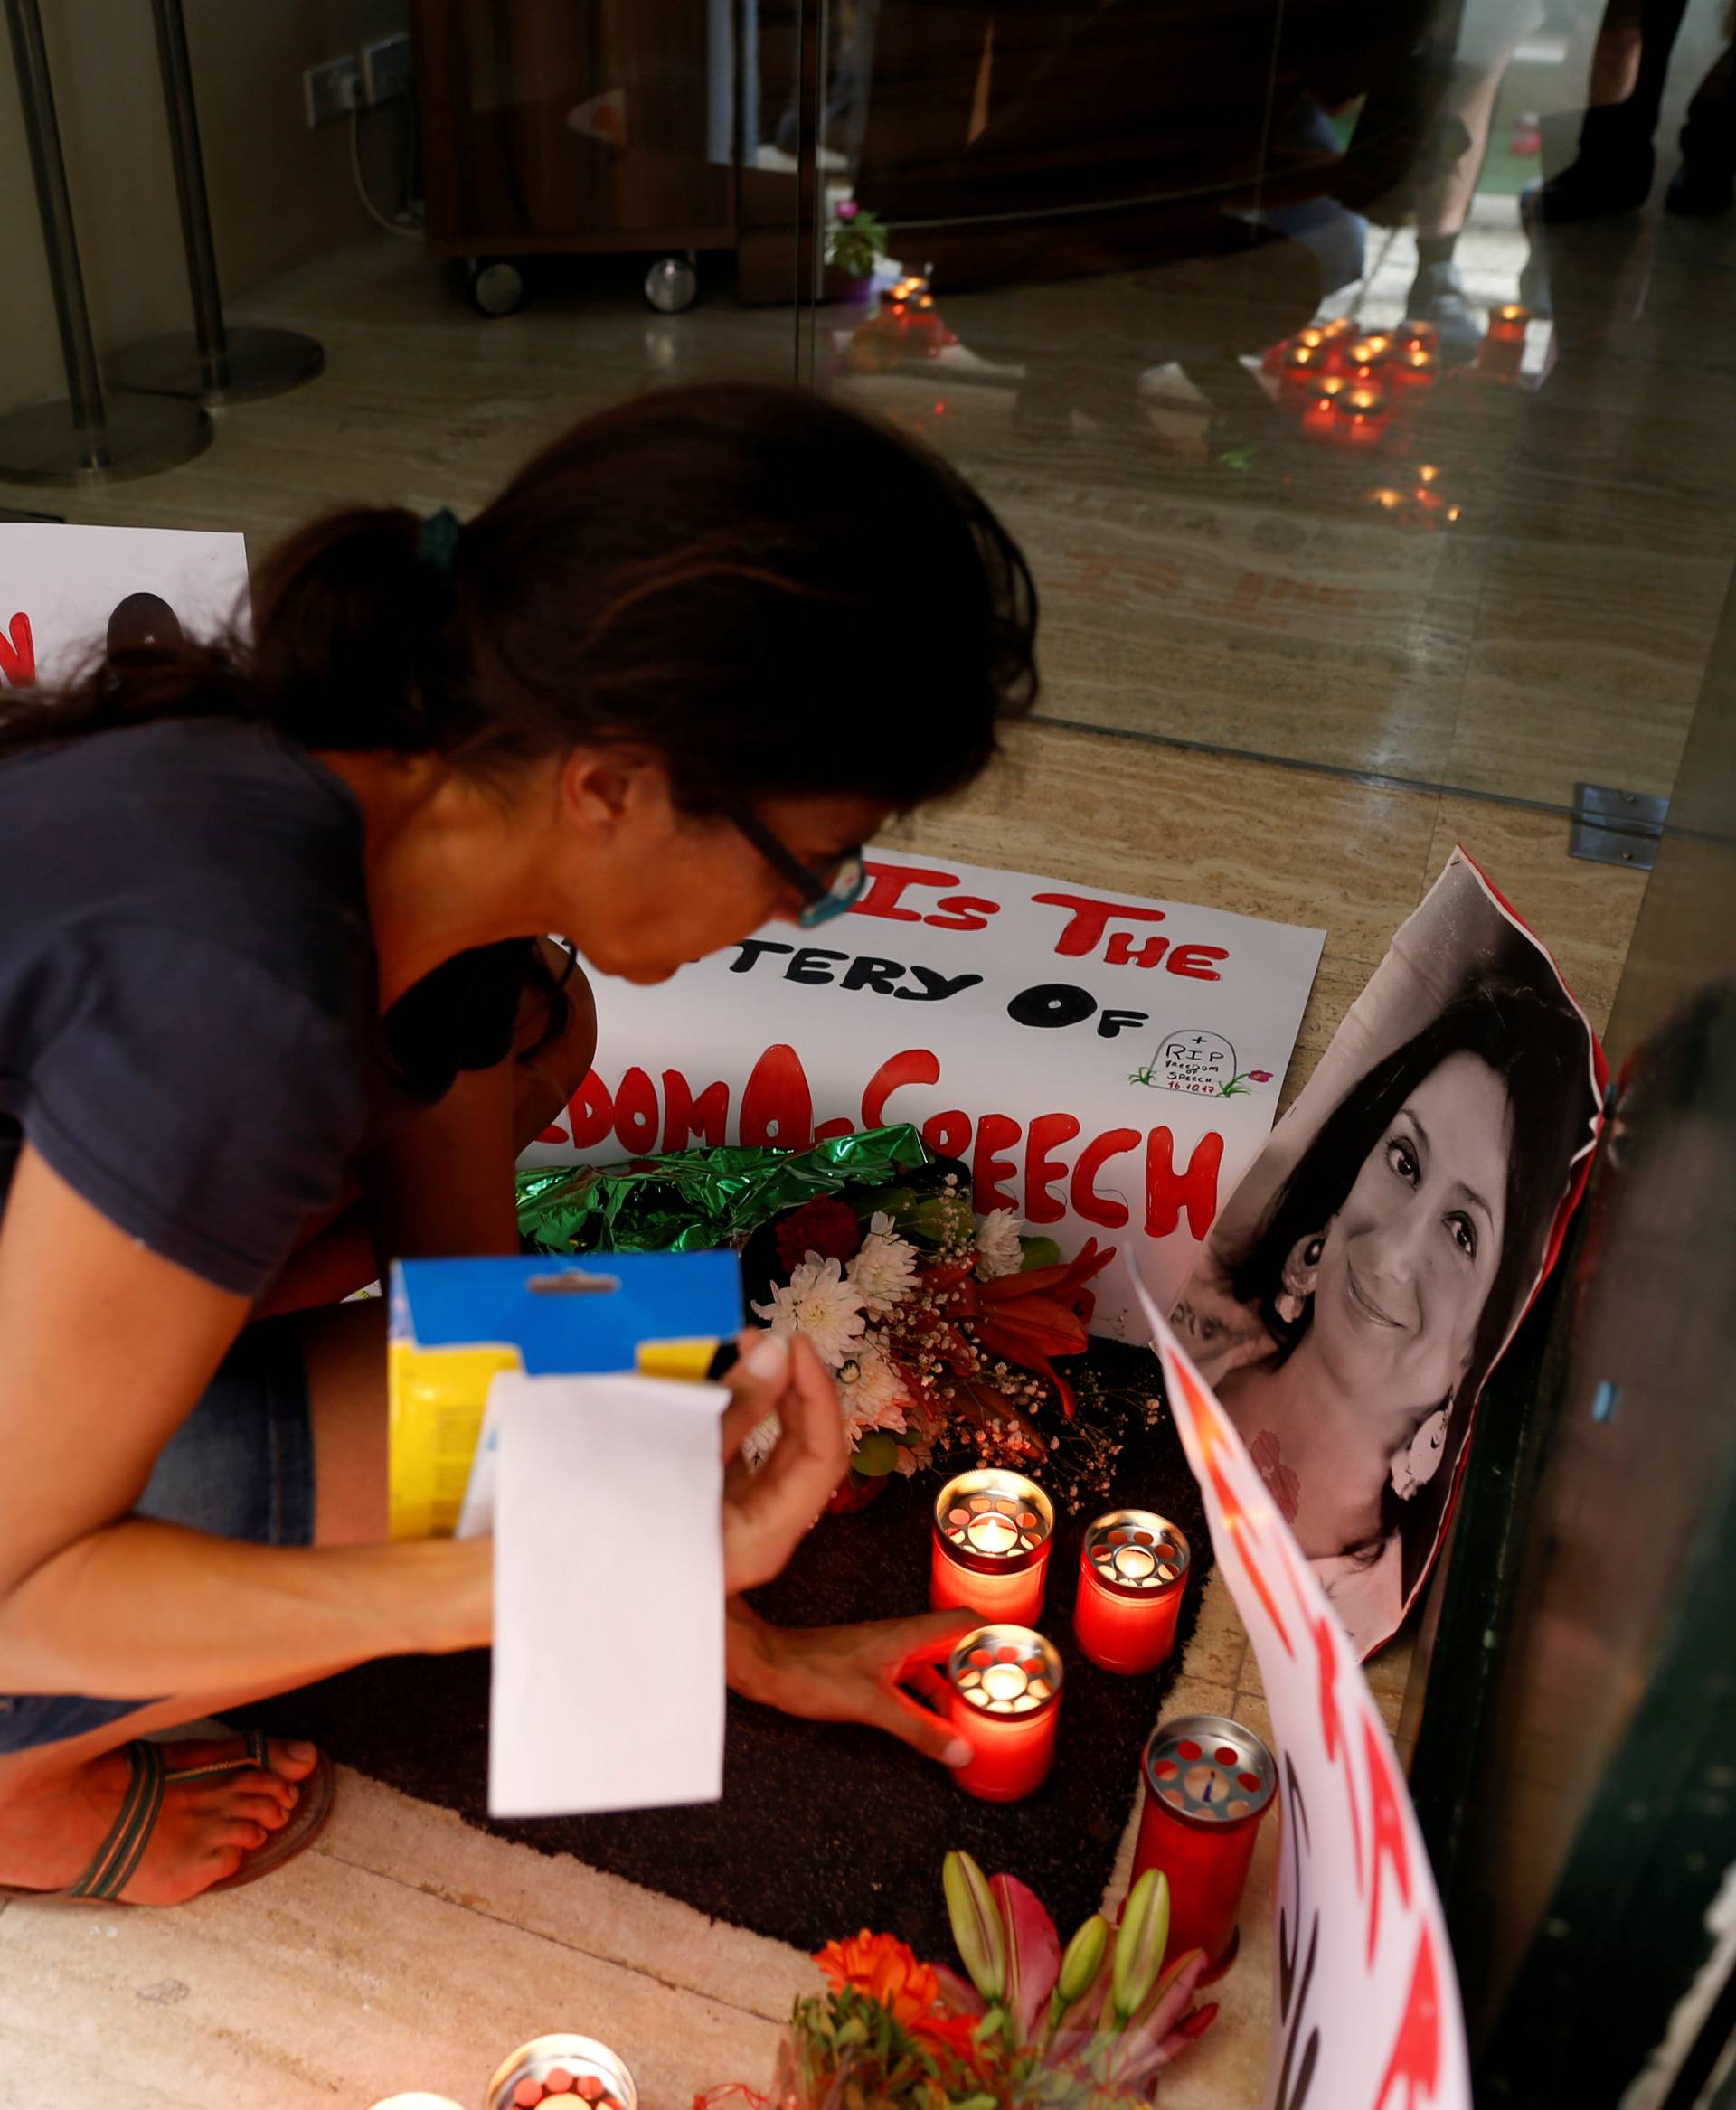 Activists place photos of assassinated anti-corruption journalist Caruana Galizia together with flowers, candles and protest posters, in the entrance of Malta's Ministry of Justice in Valletta